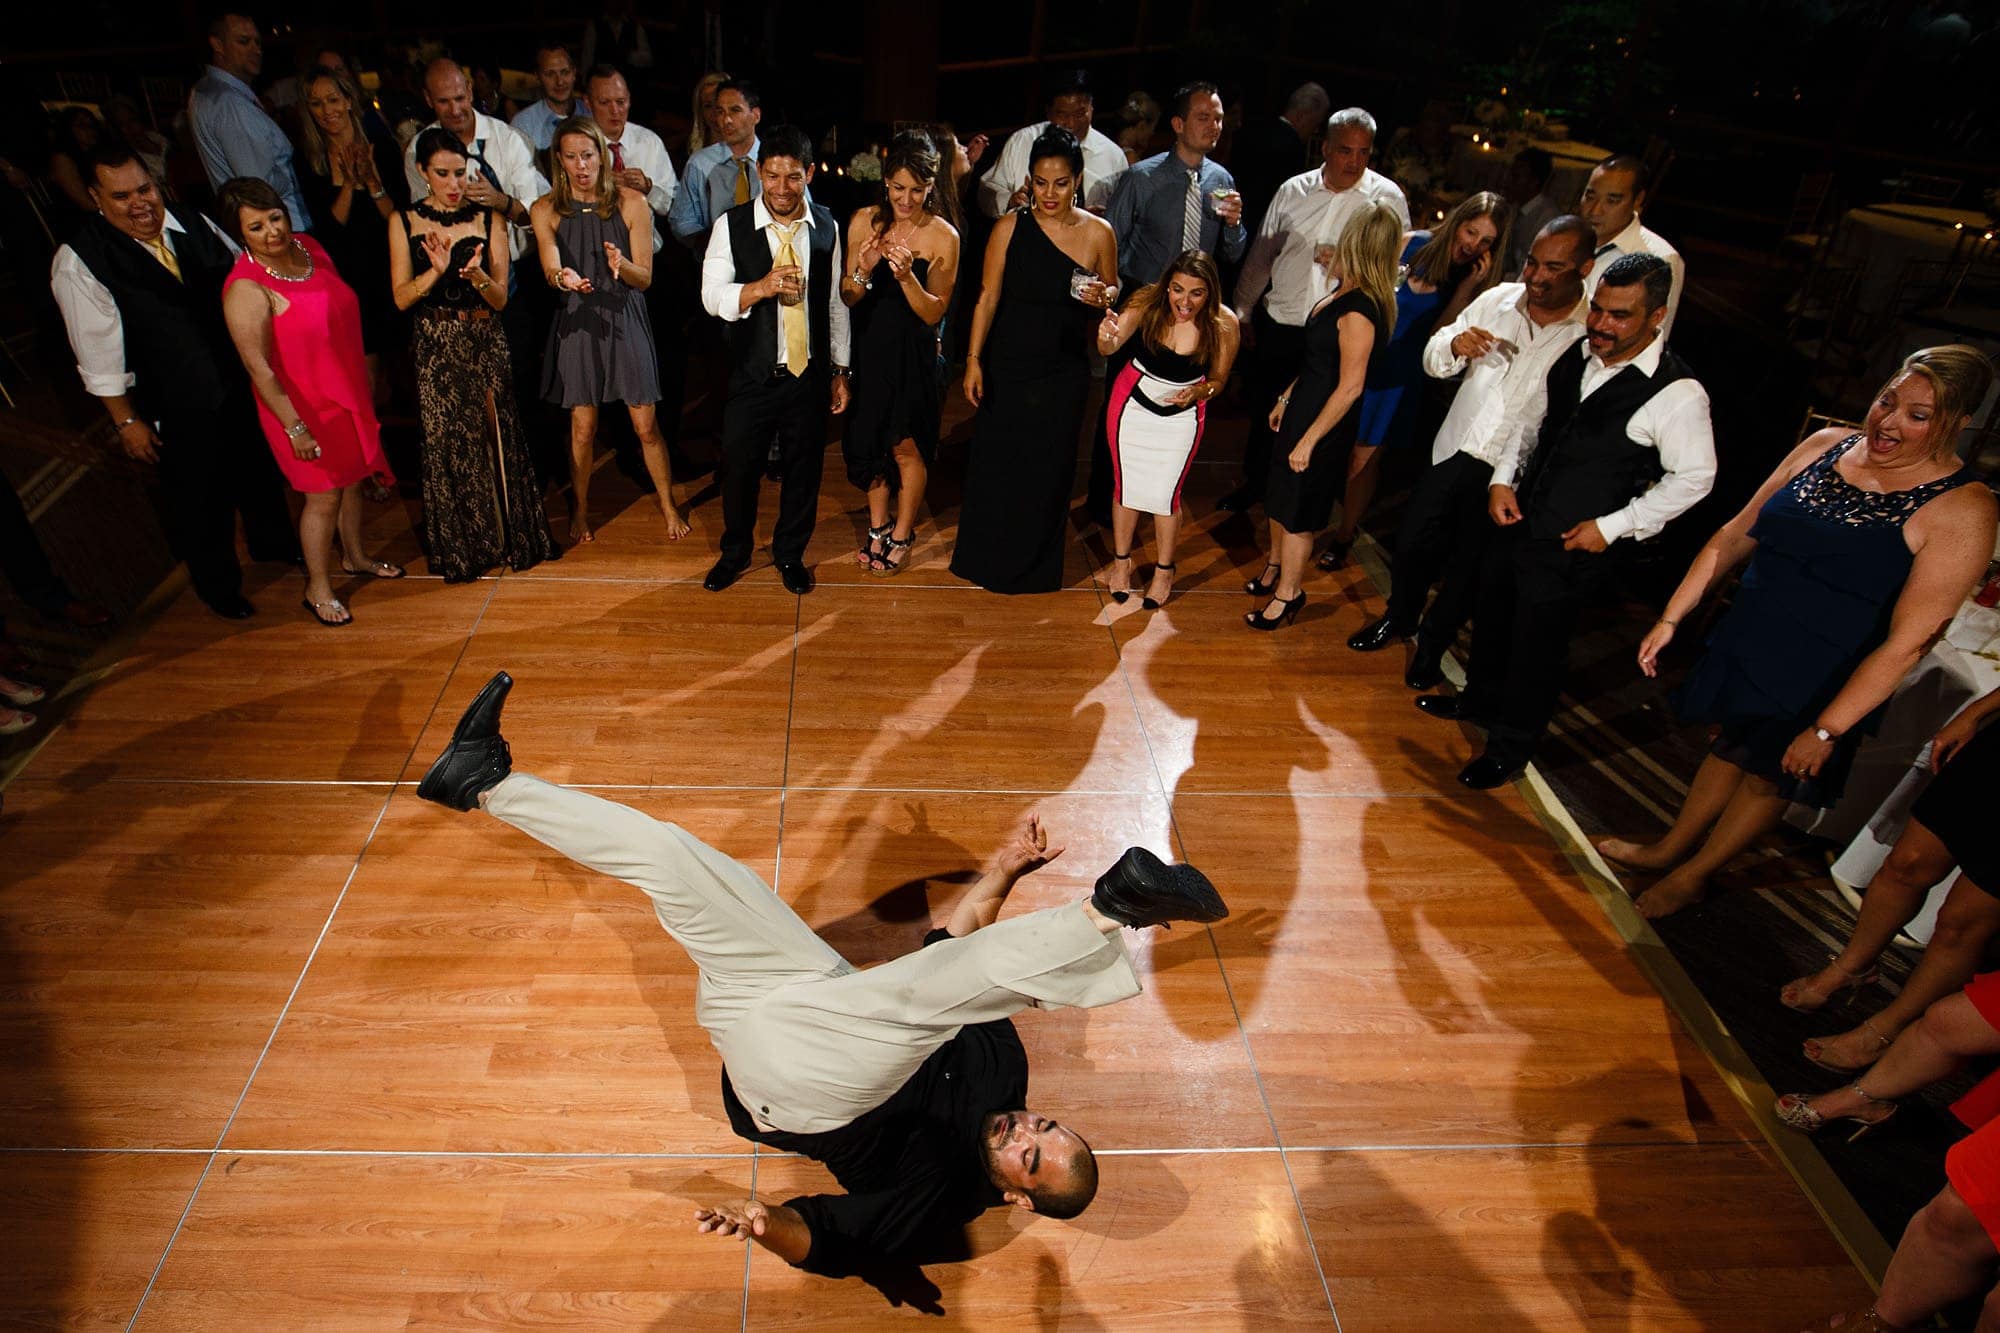 A guest break dances on the dance floor during the wedding reception at The Hyatt Lodge in Oak Brook, Illinois.